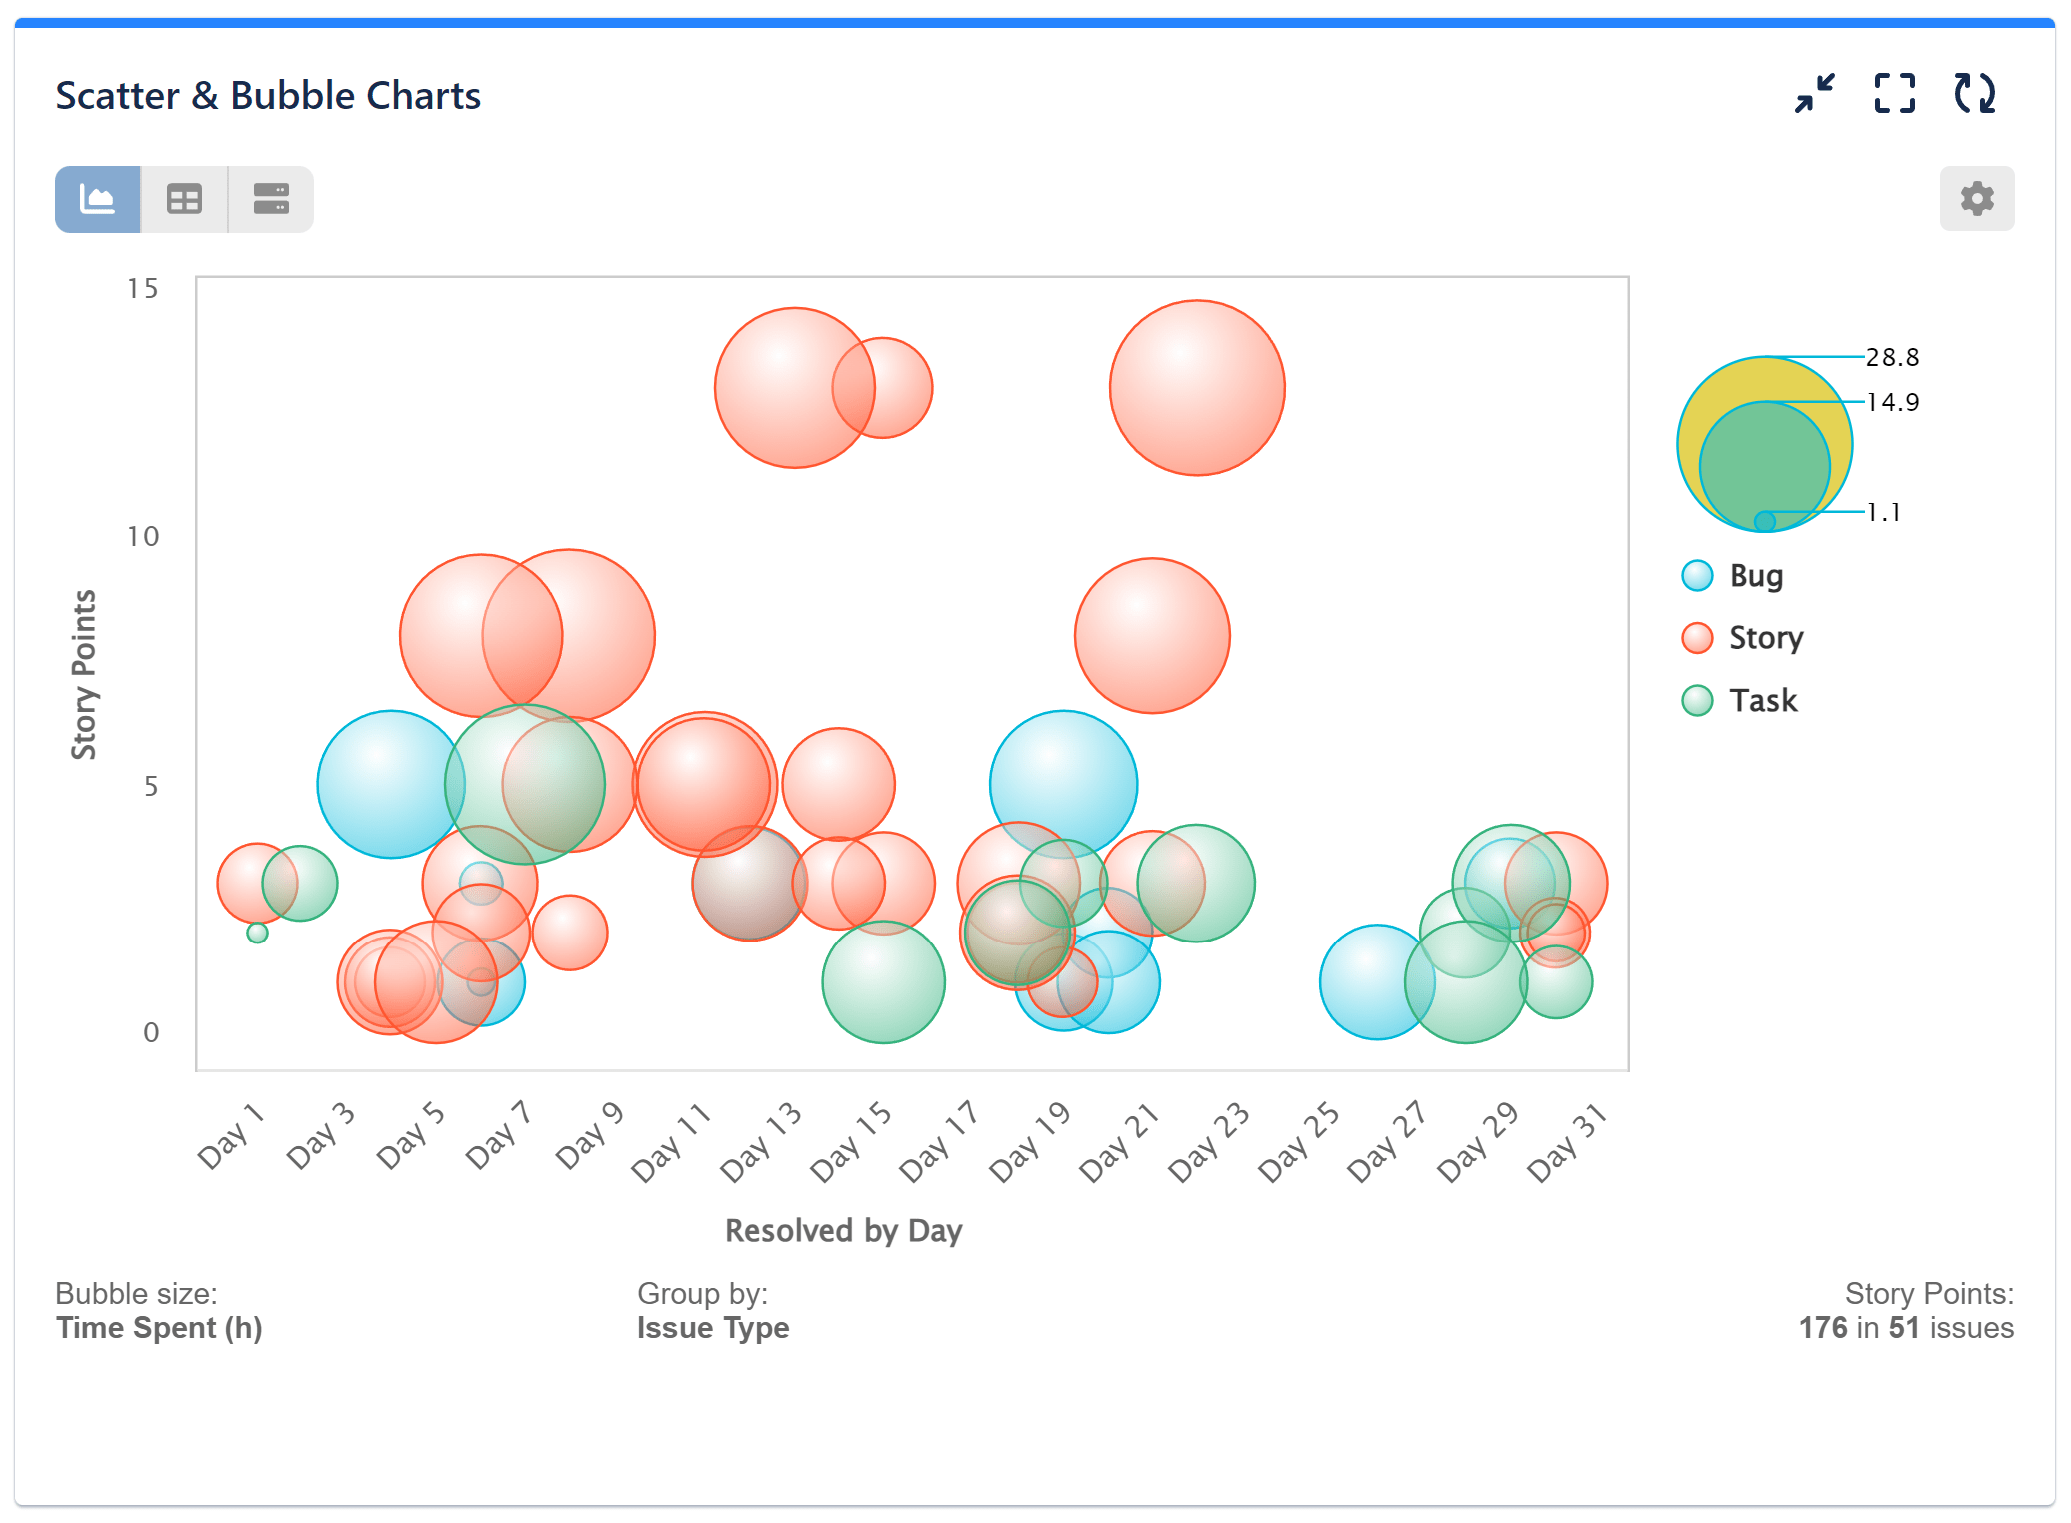 Bubble chart group by